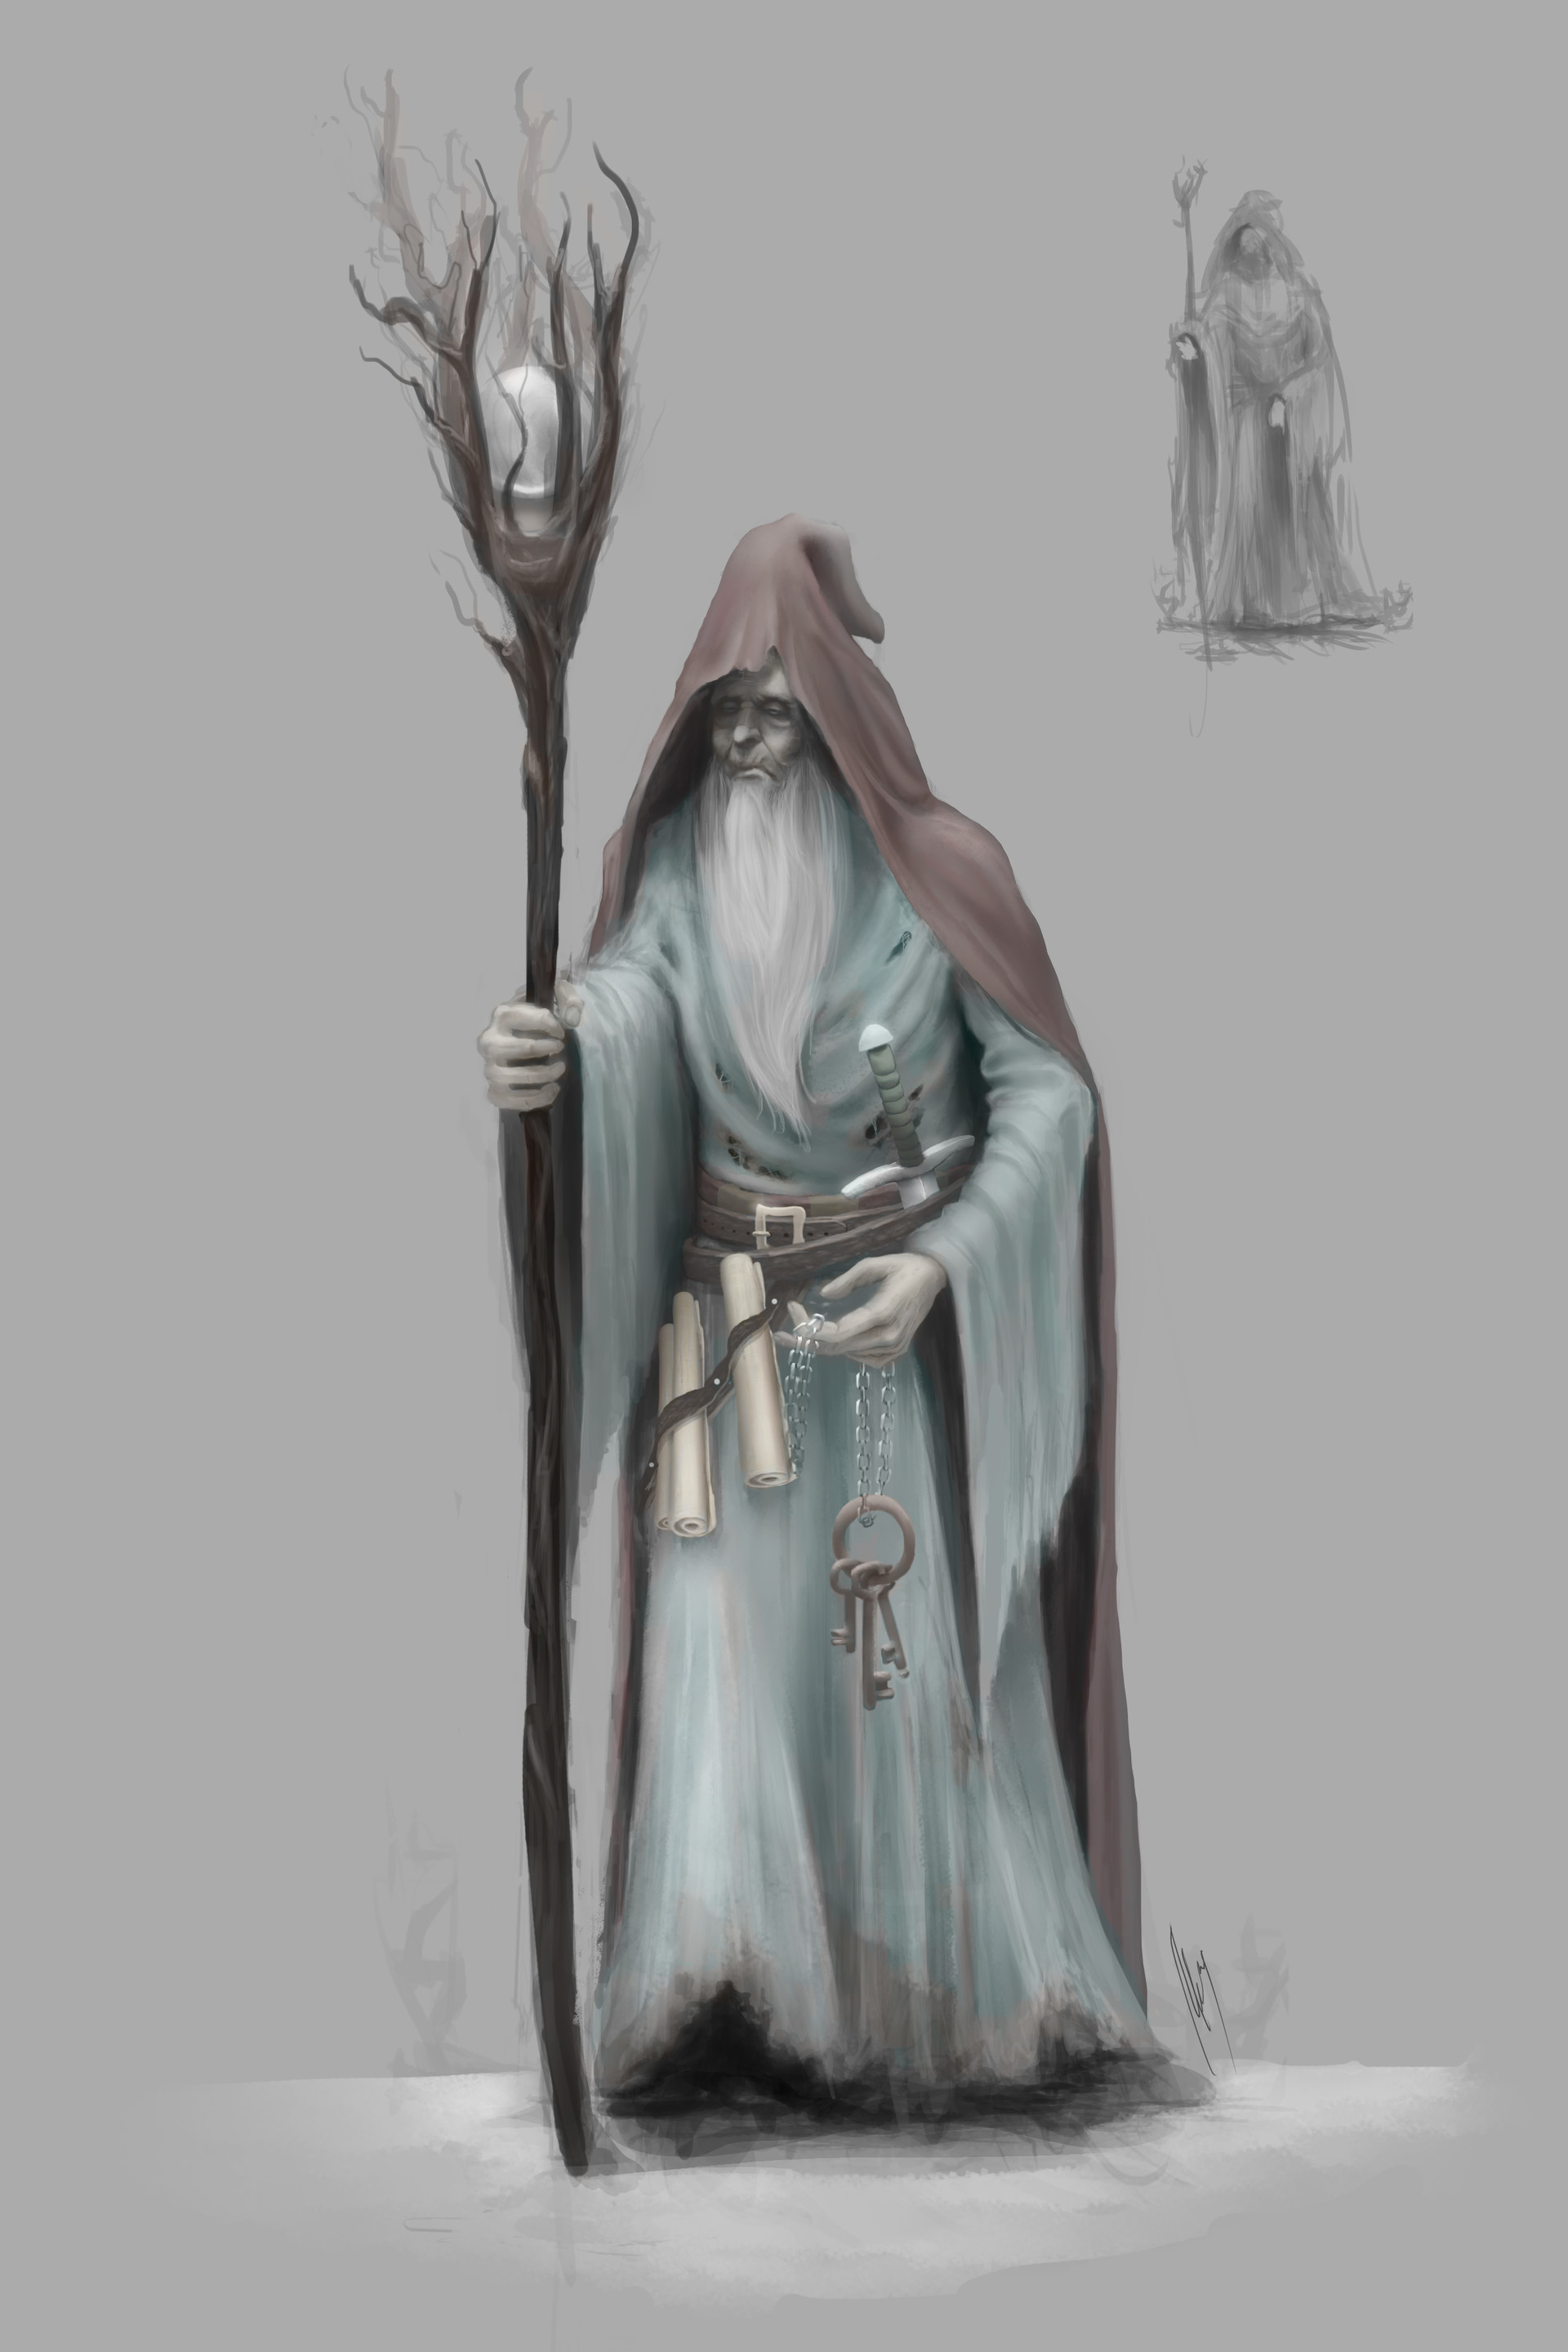 ArtStation - Character Concept - Old Wizard